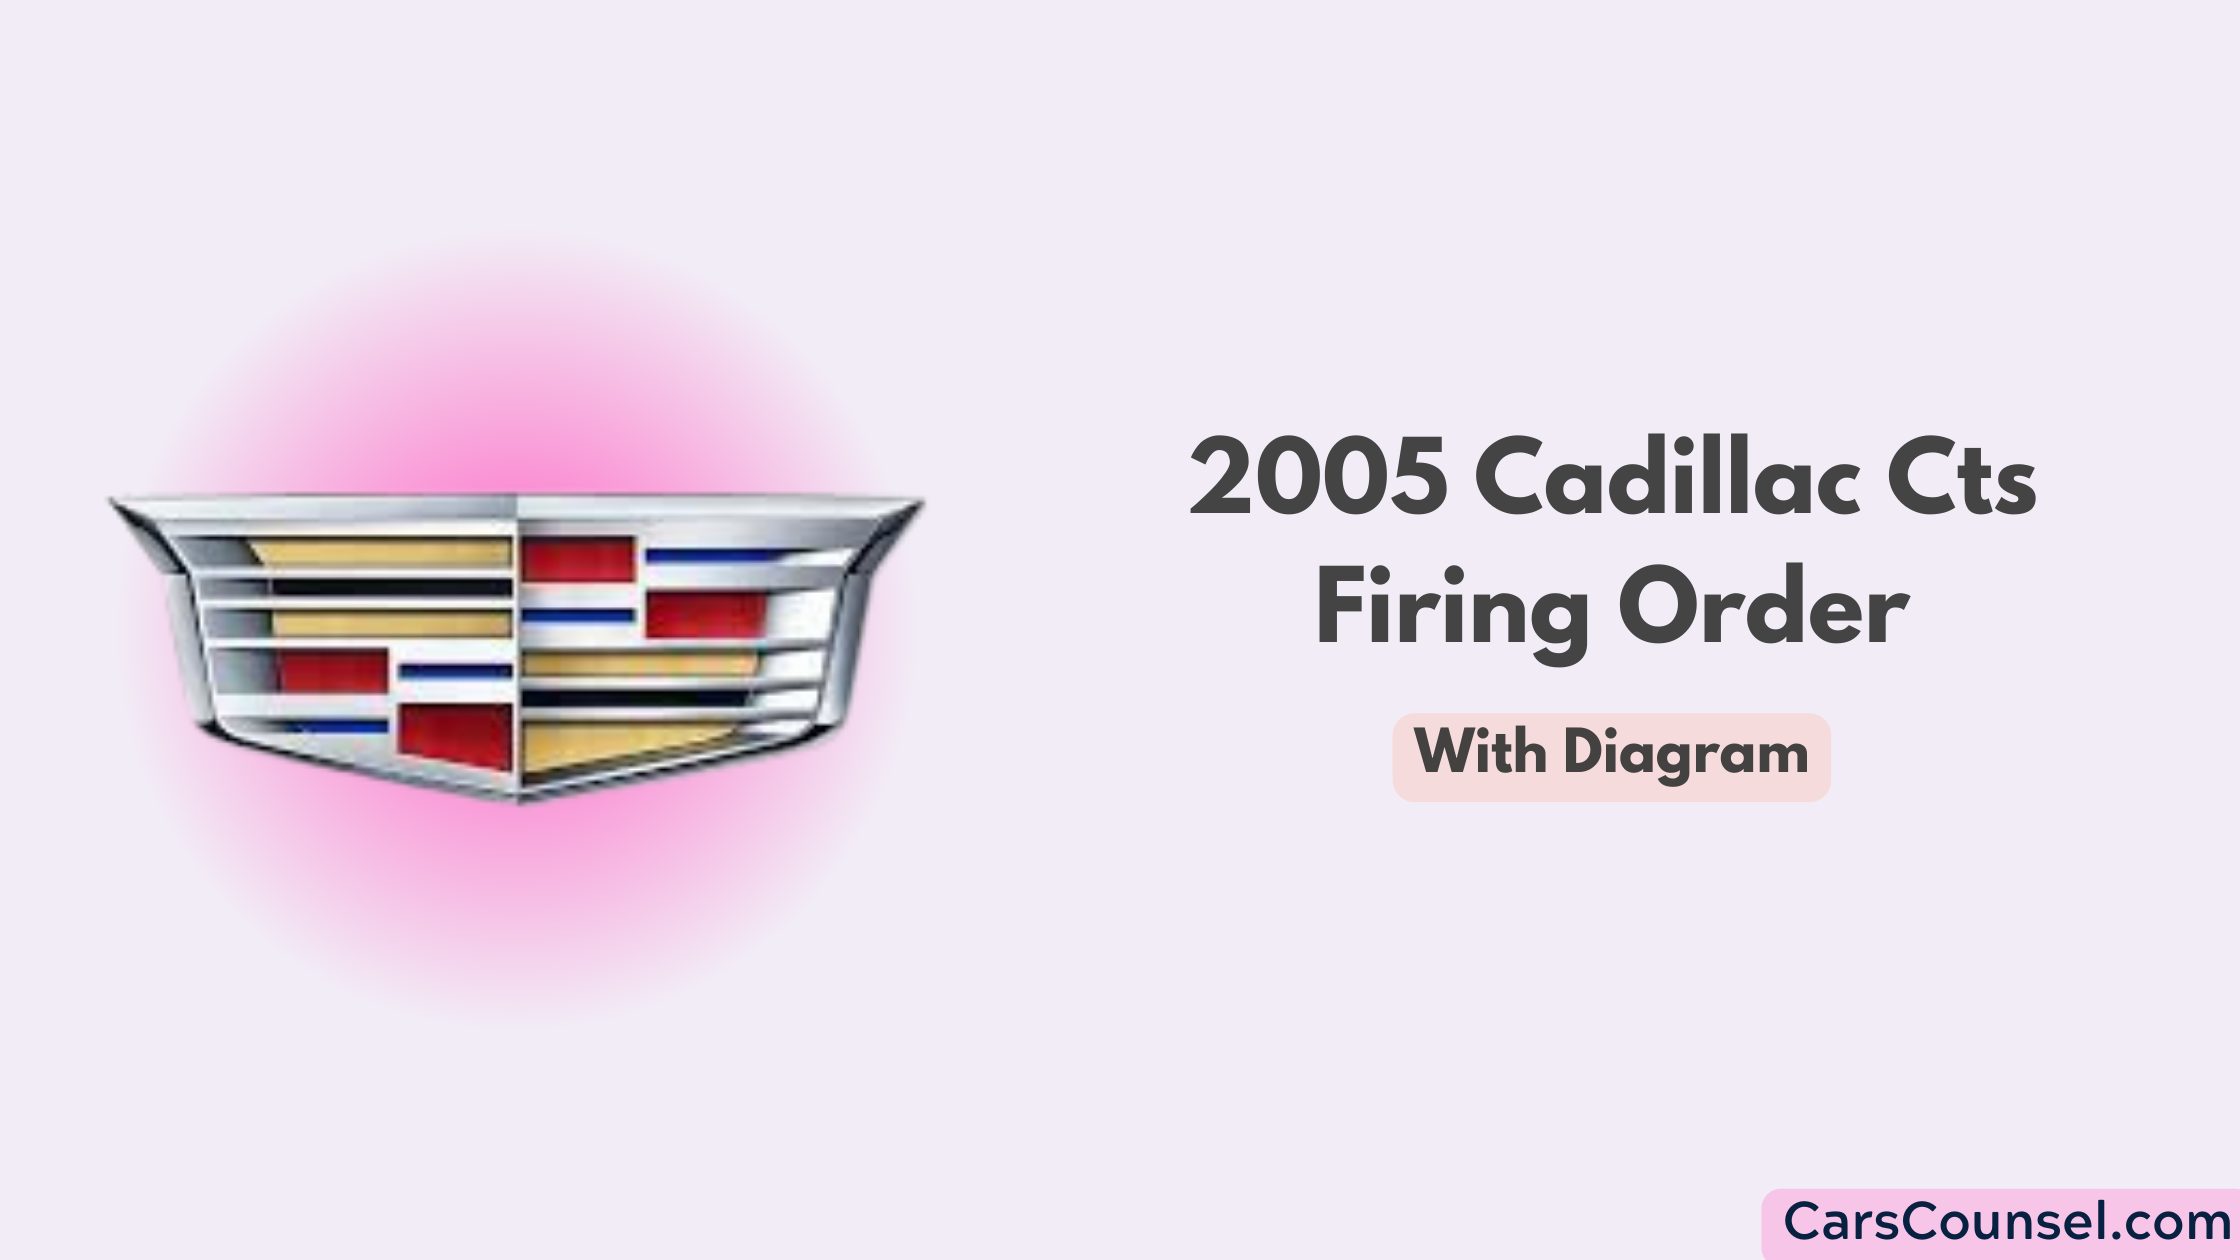 2005 Cadillac Cts Firing Order With Diagram